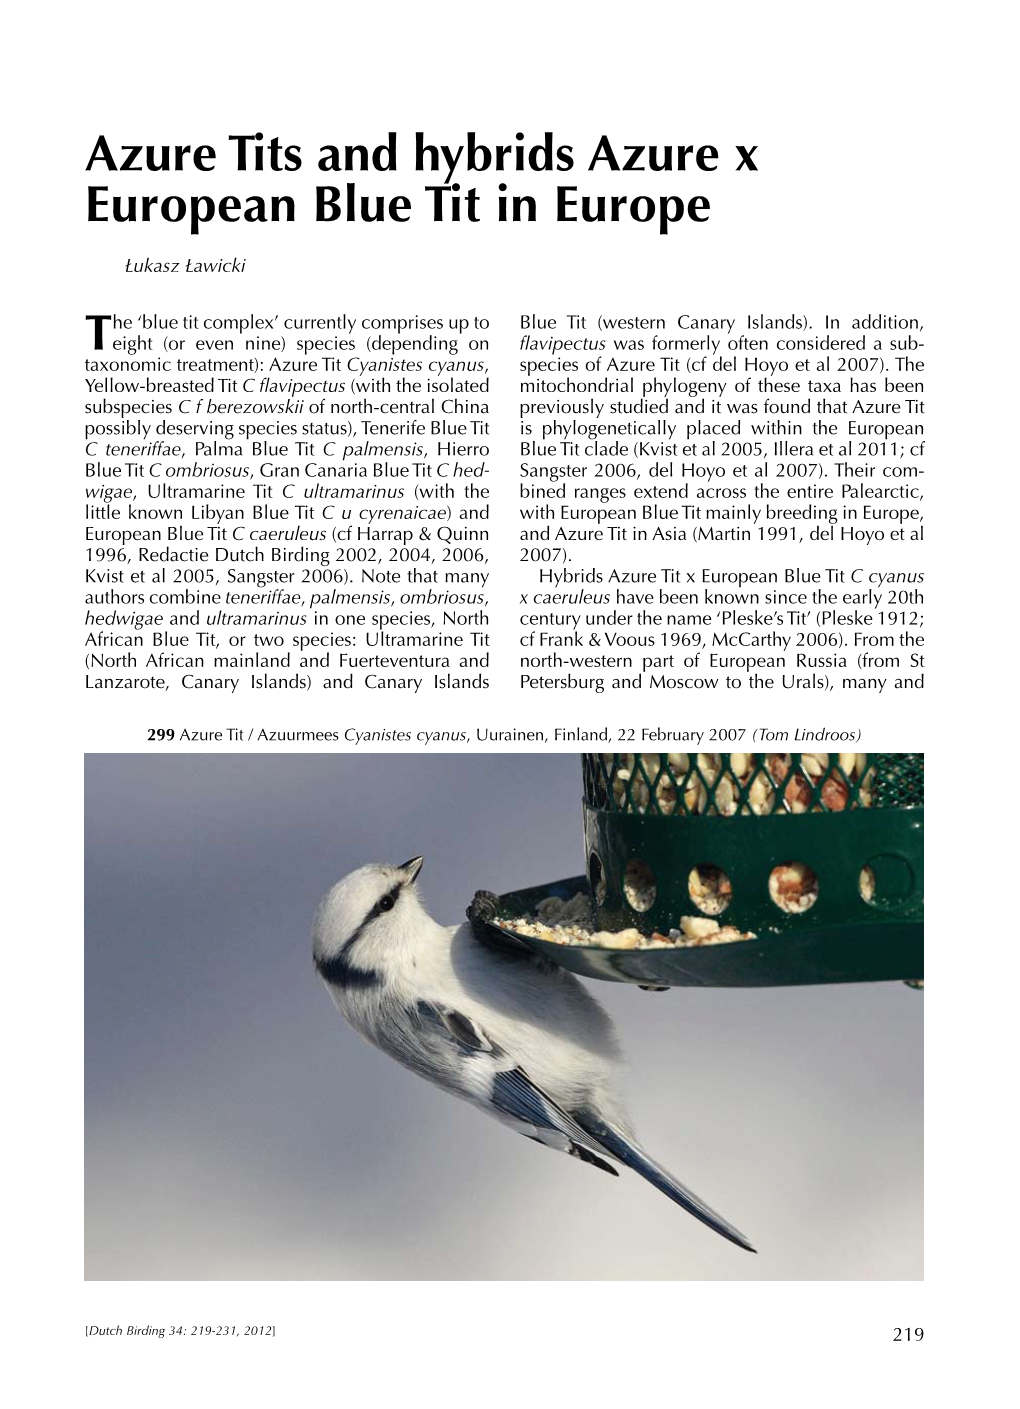 Azure Tits and Hybrids Azure X European Blue Tit in Europe